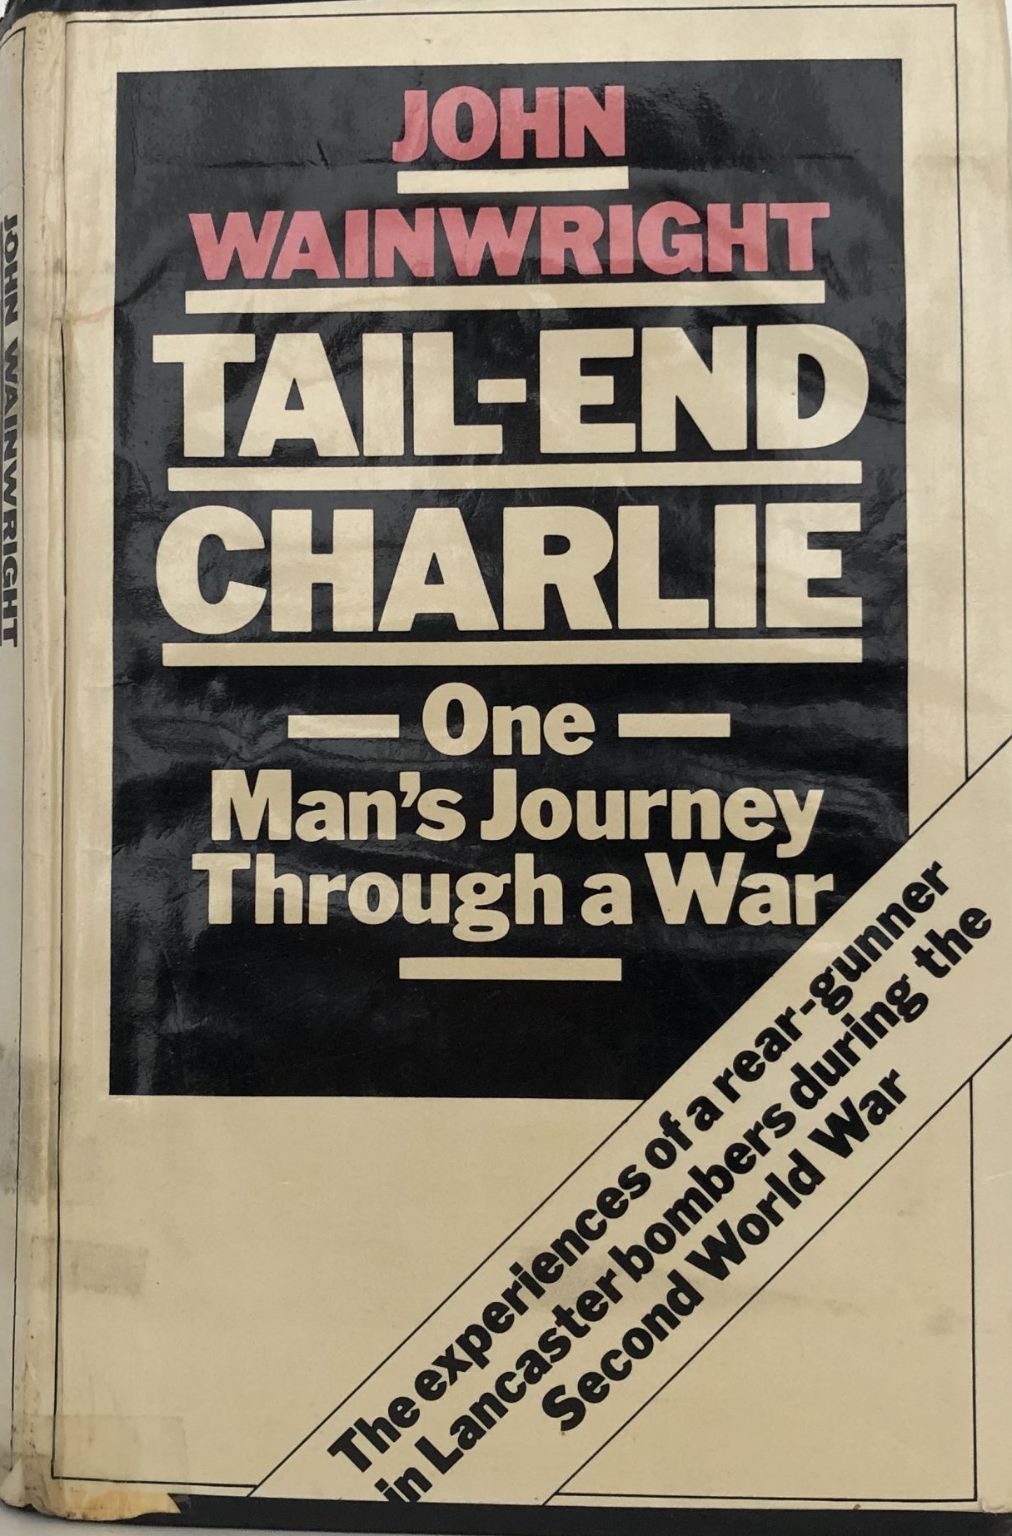 TAIL-END CHARLIE: One Man's Journey Through a War